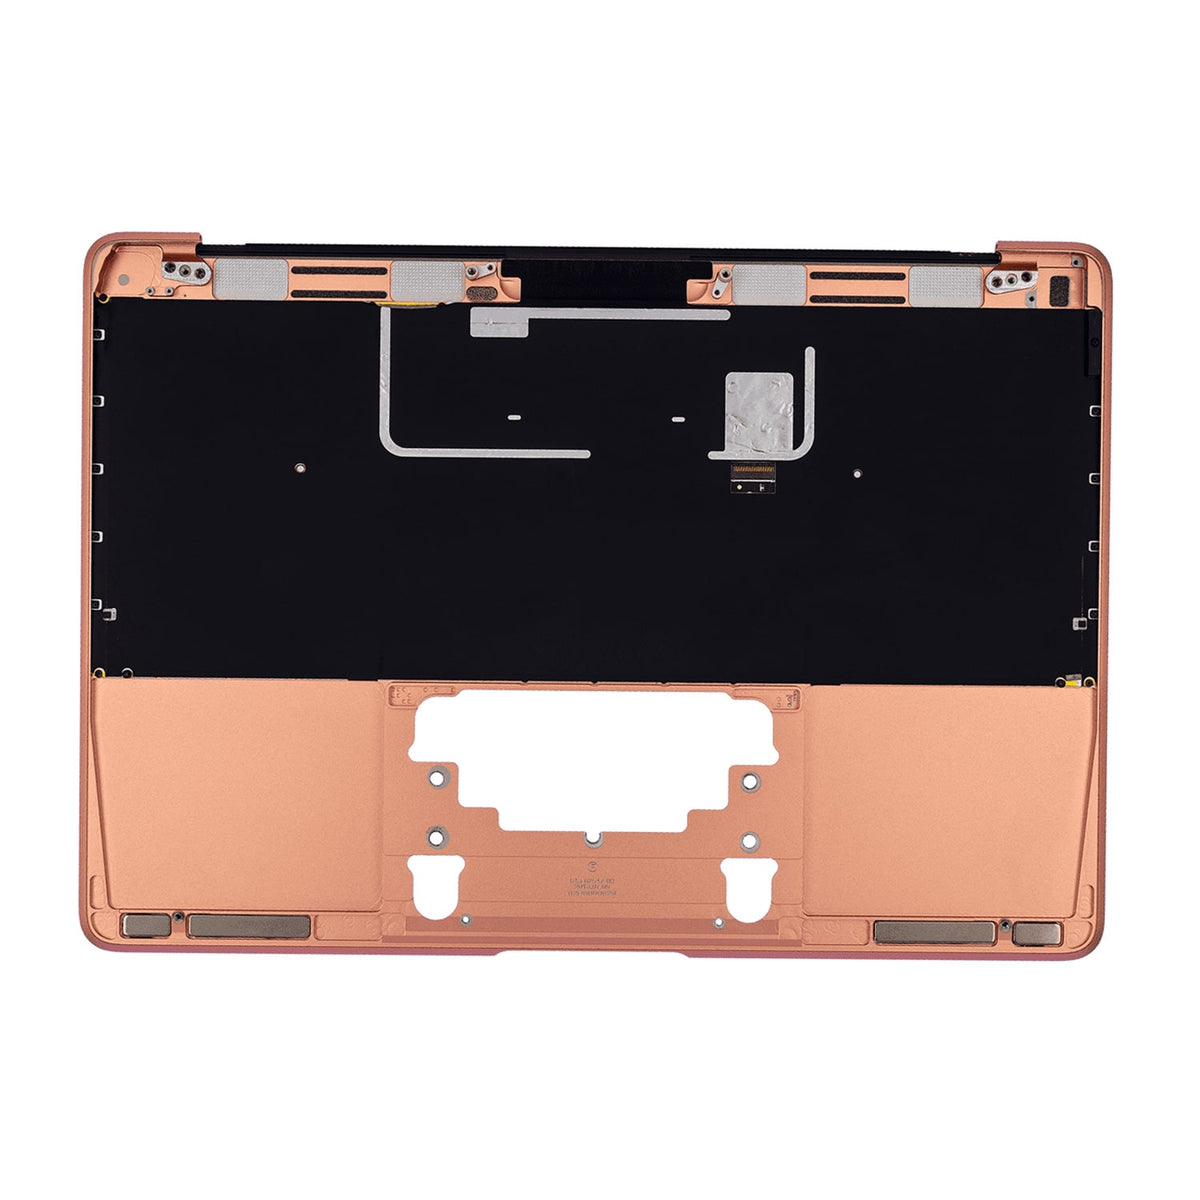 ROSE GOLD UPPER CASE WITH KEYBOARD FOR MACBOOK RETINA 12" A1534 (EARLY 2016 - MID 2017)